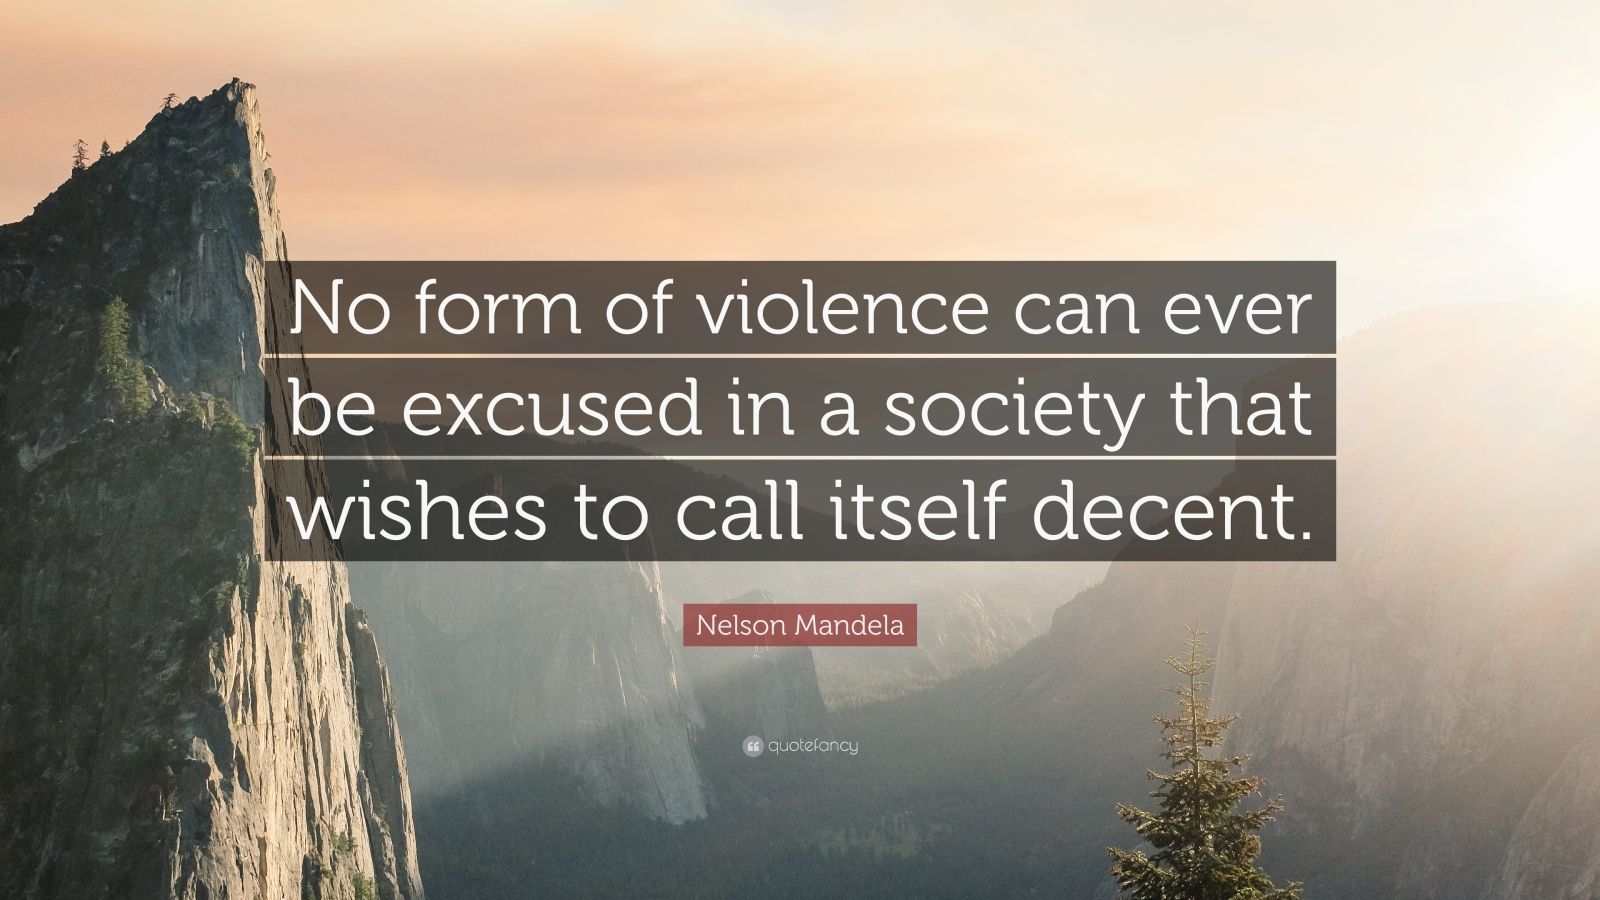 Nelson Mandela Quote: “No form of violence can ever be excused in a